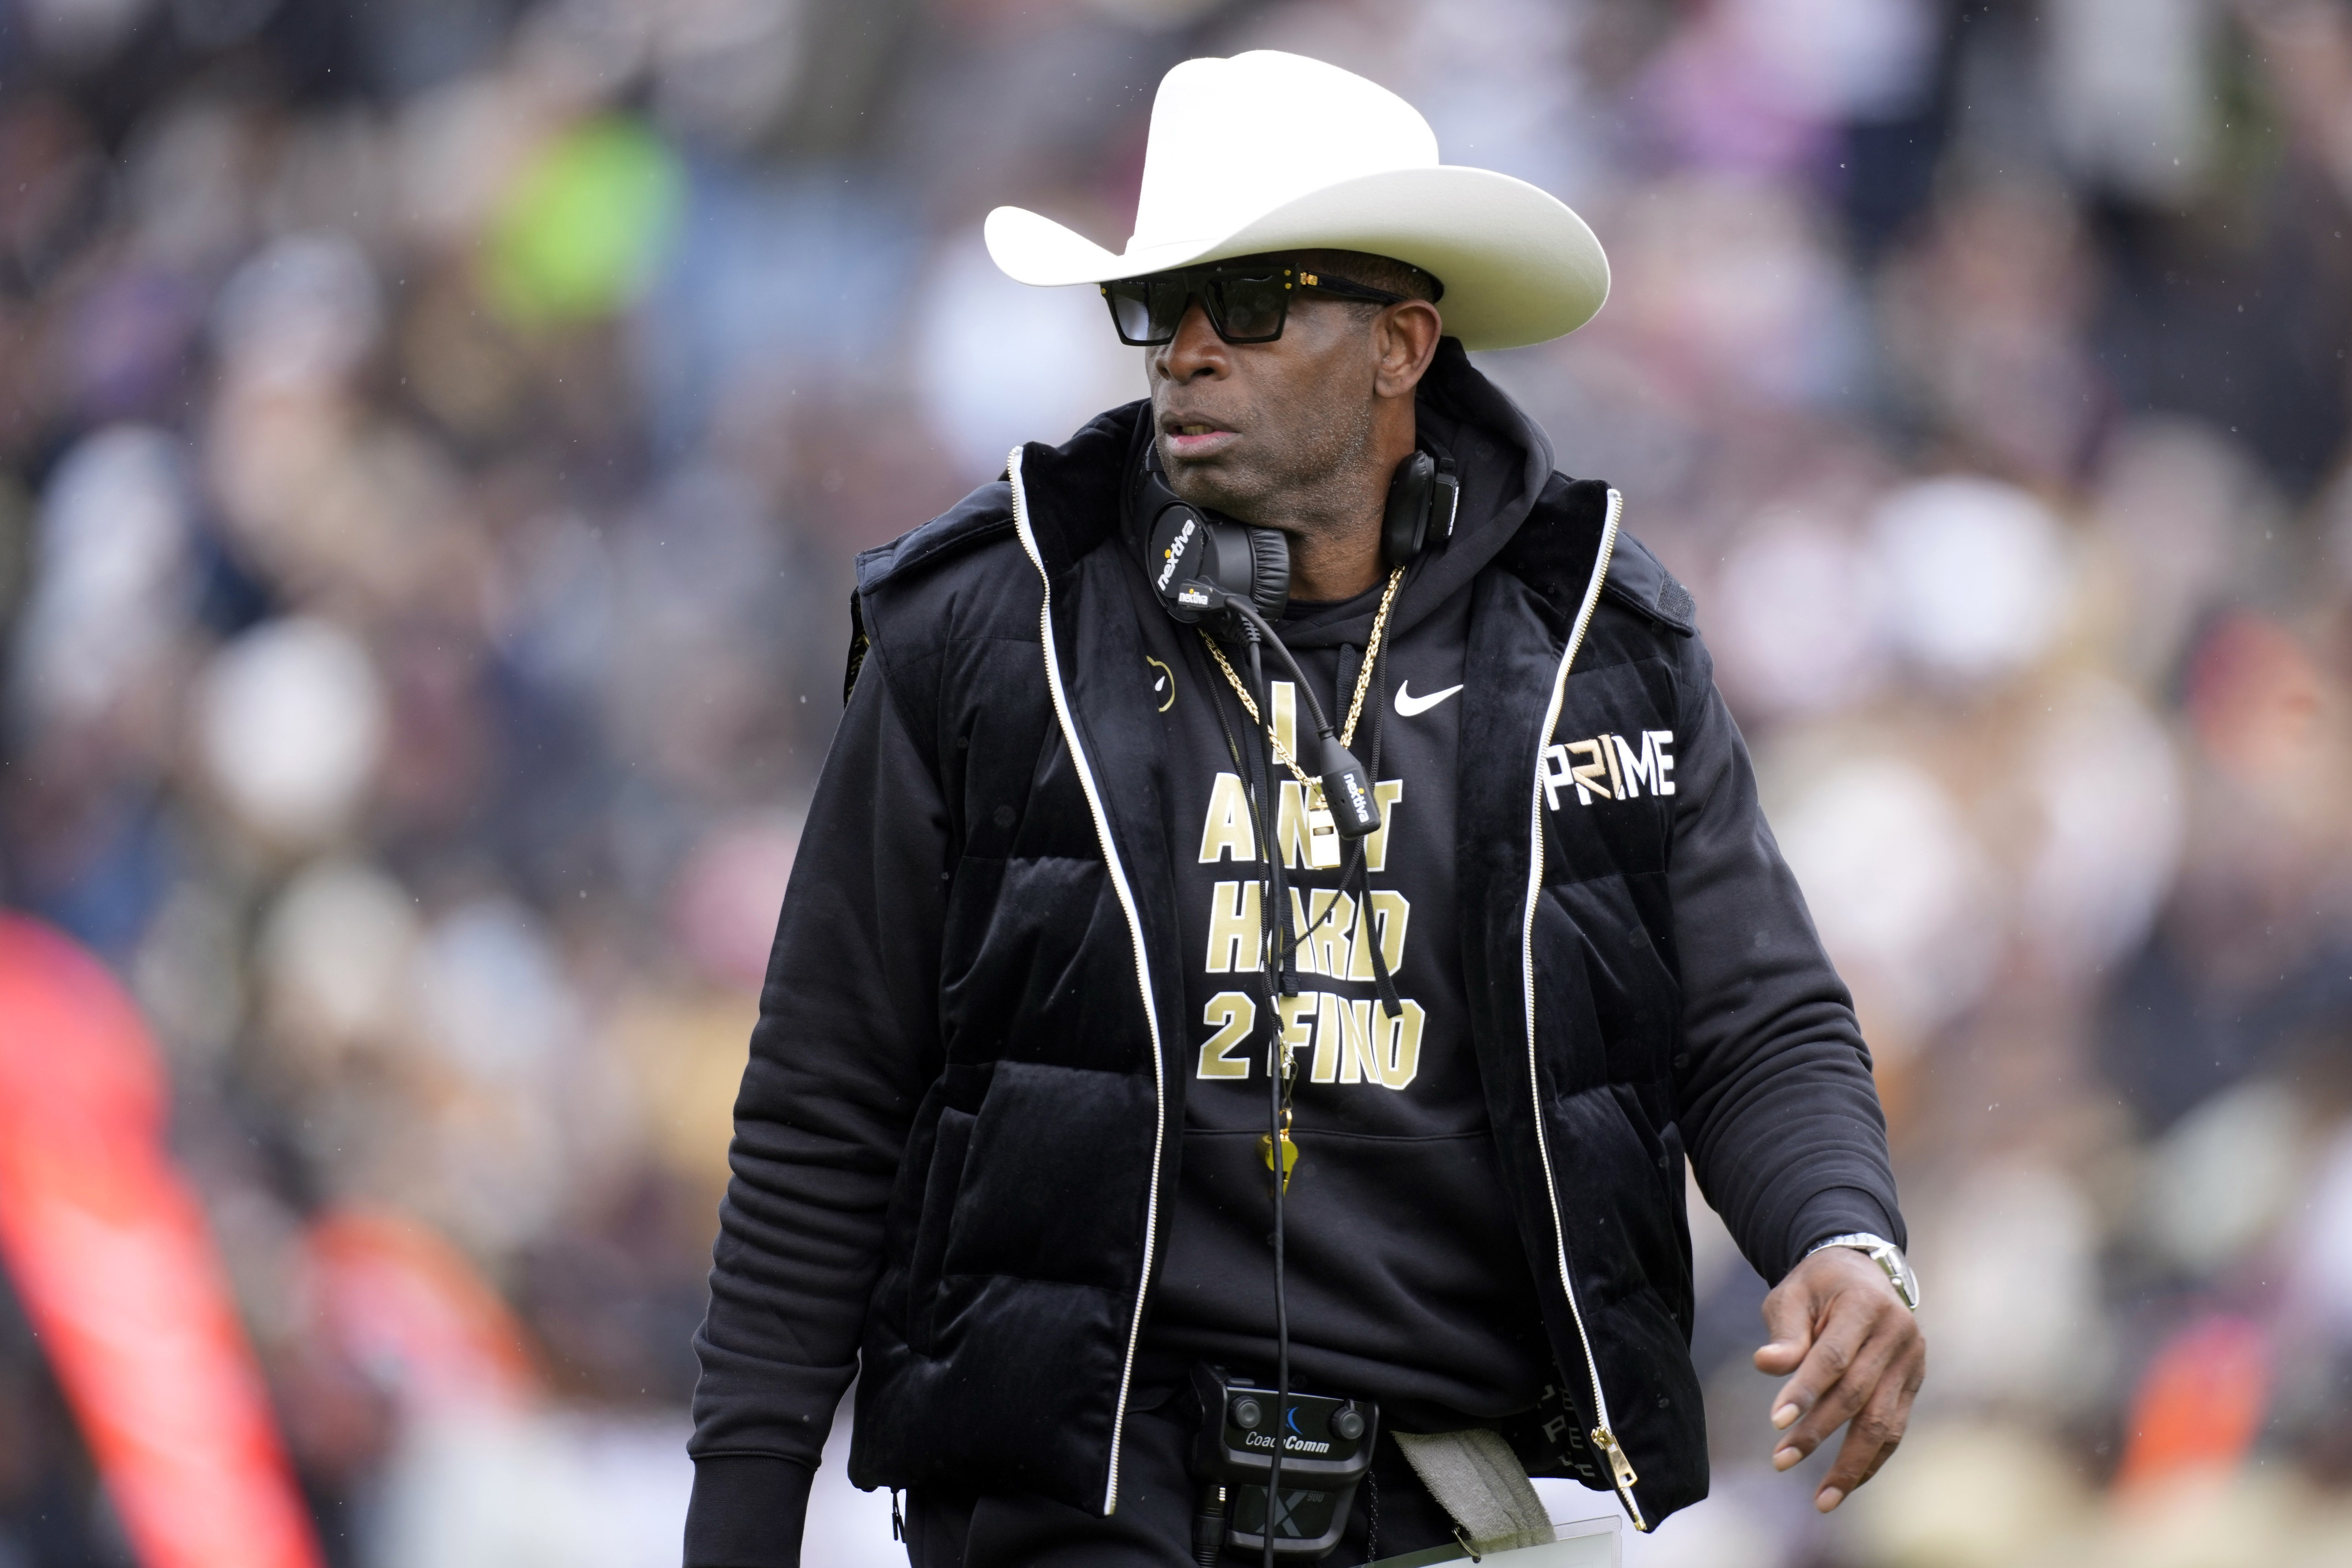 Deion Sanders goes viral for flashy outfit made in Texas apparel